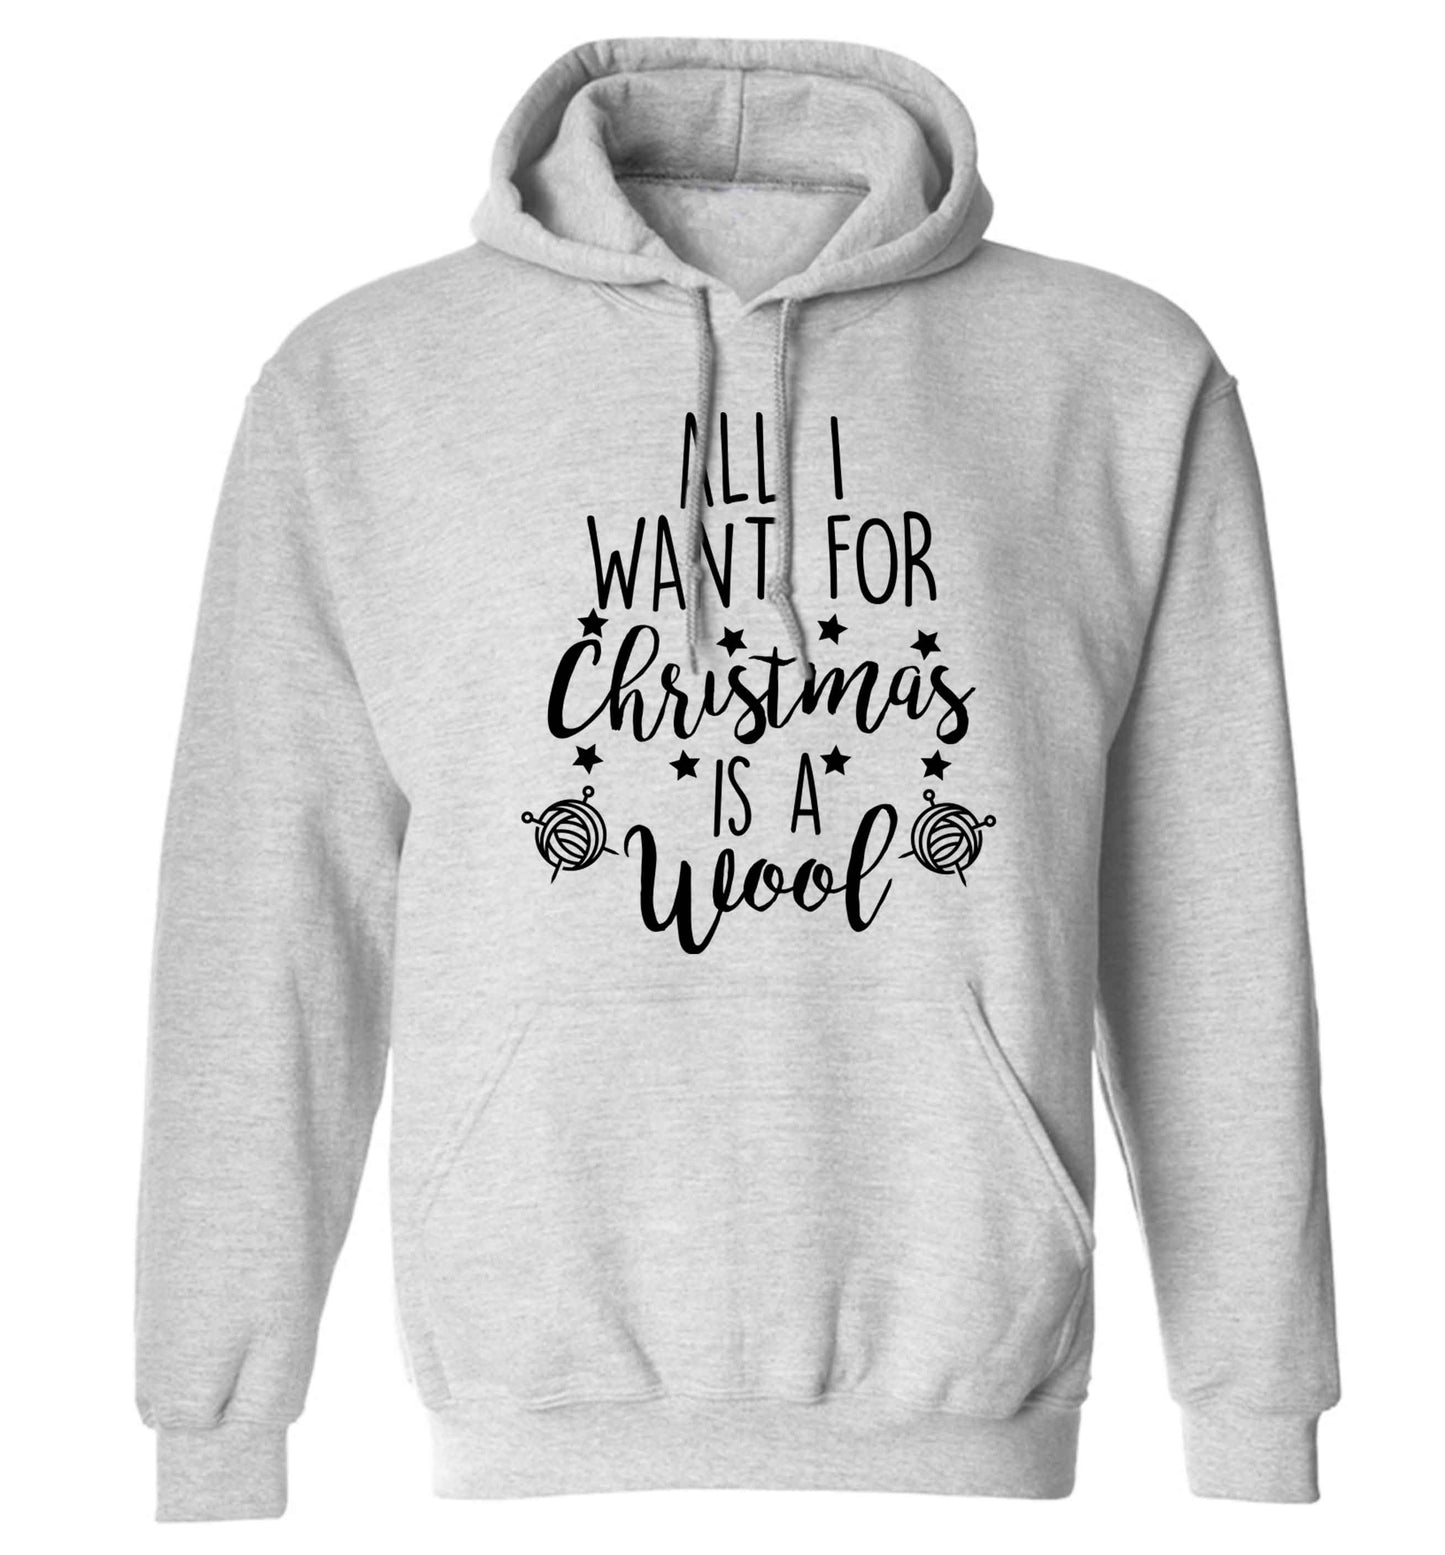 All I want for Christmas is wool! adults unisex grey hoodie 2XL